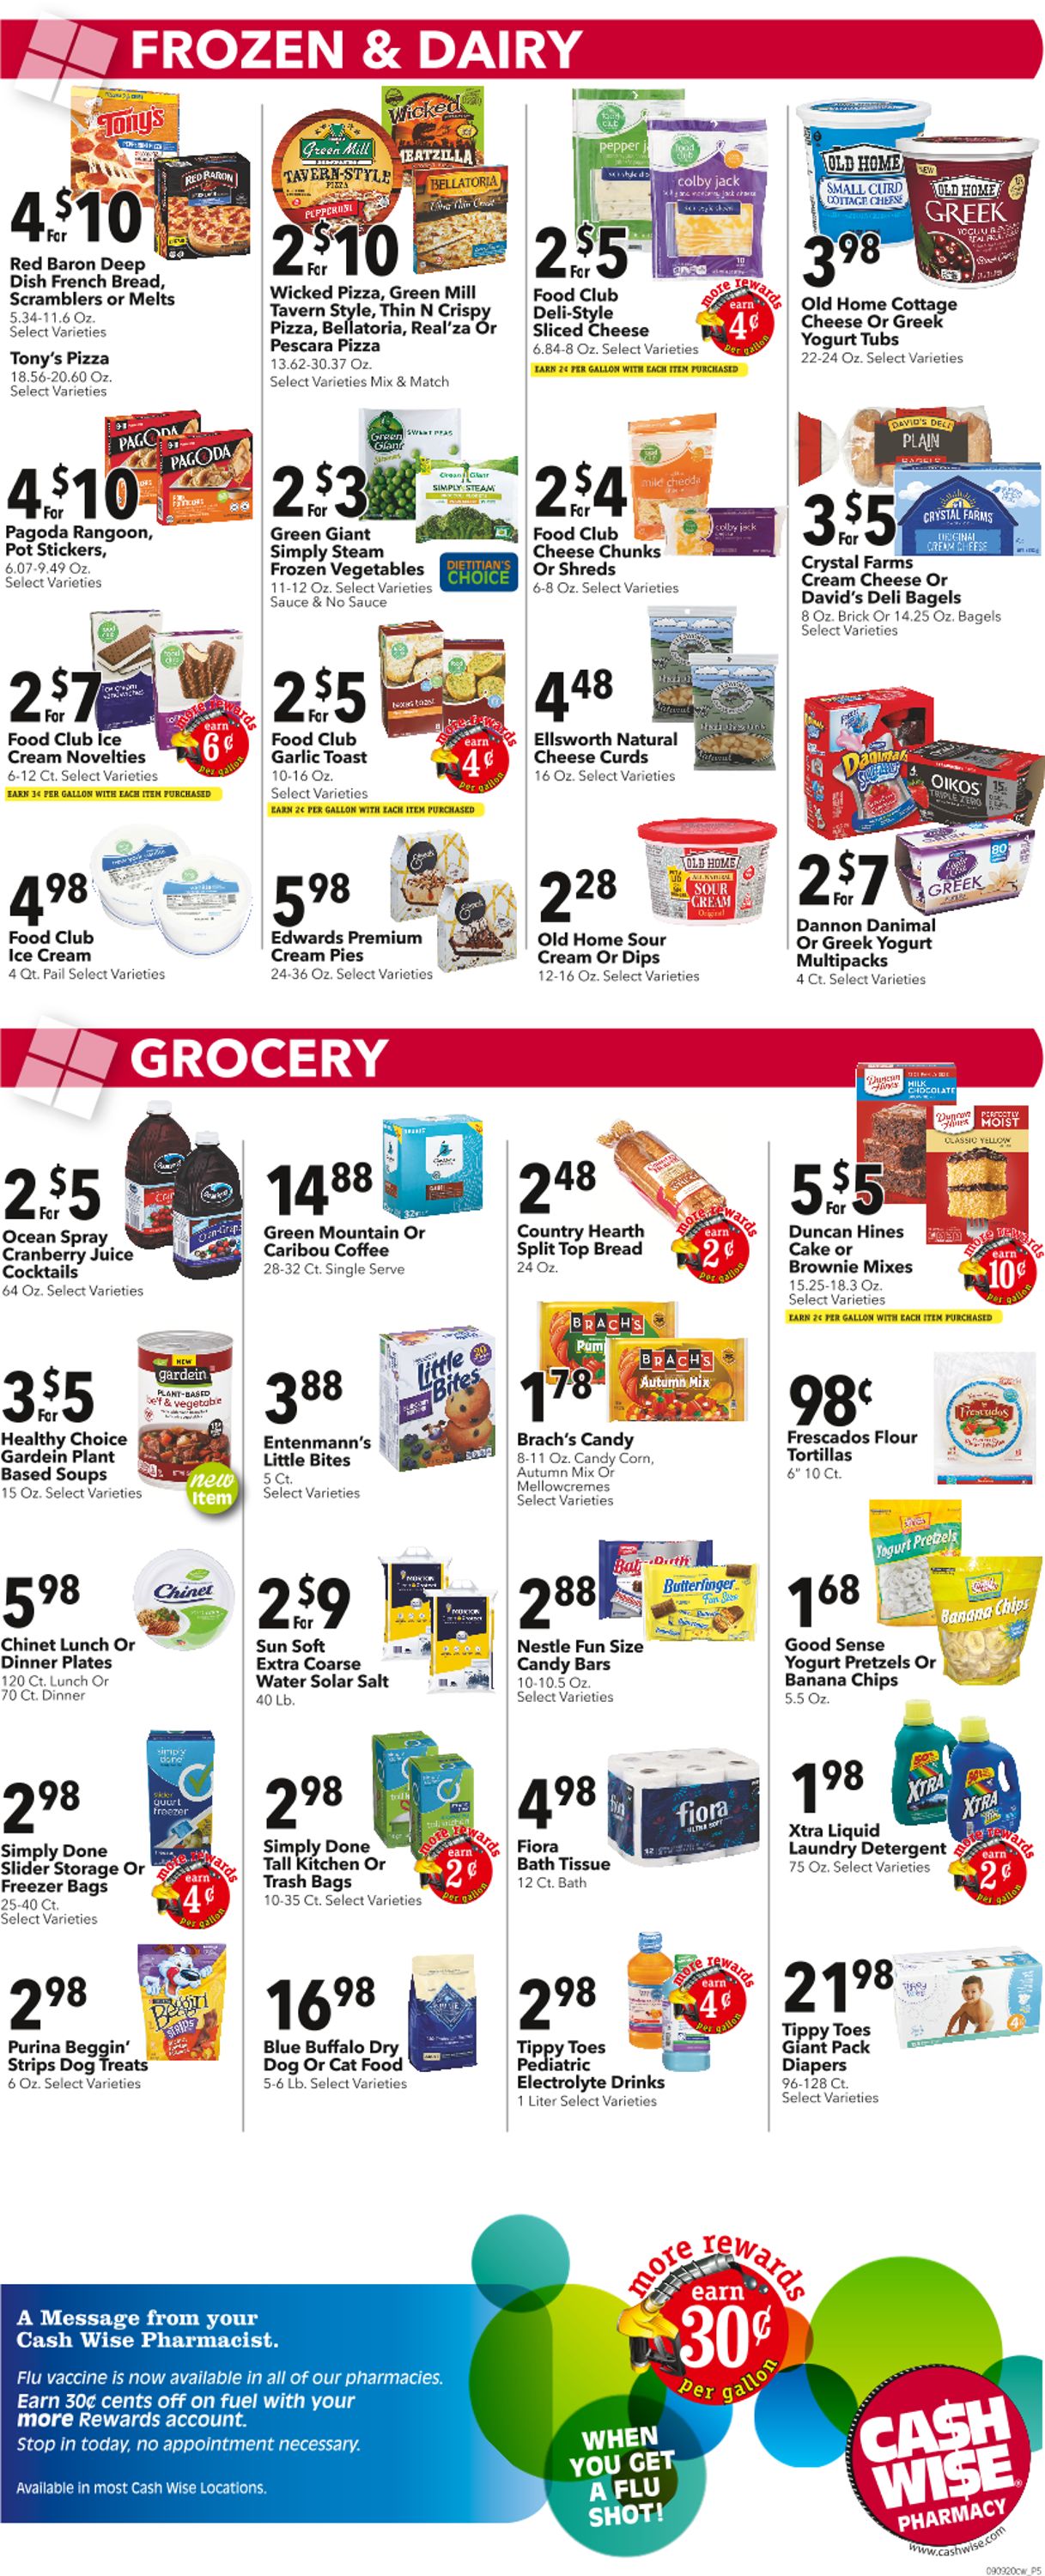 Cash Wise Weekly Ad Circular - valid 09/09-09/15/2020 (Page 3)